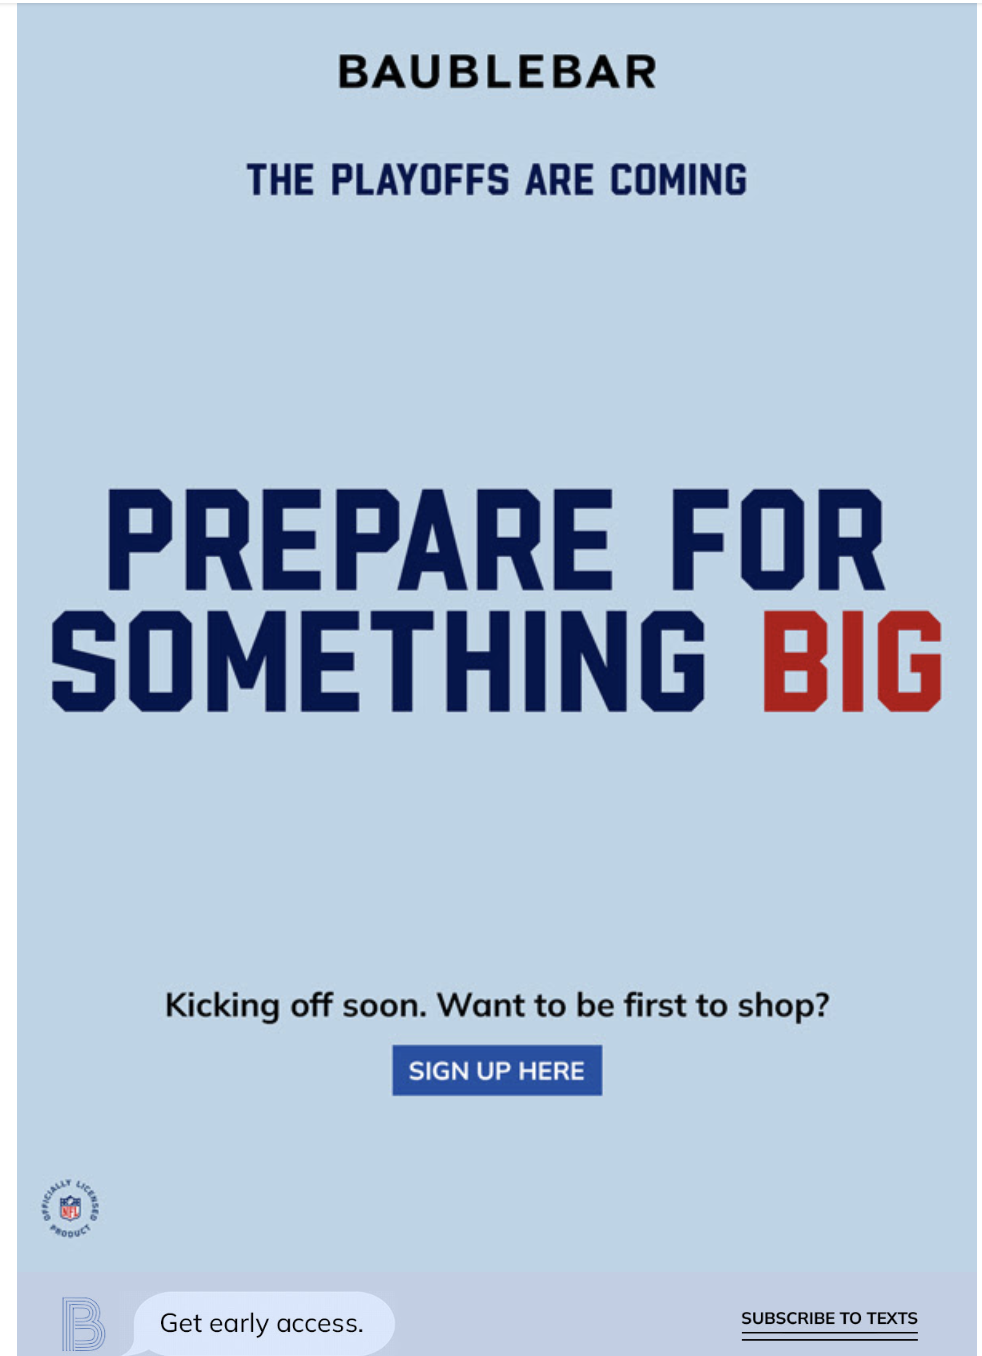 Promotional email that makes subscribers anticipate